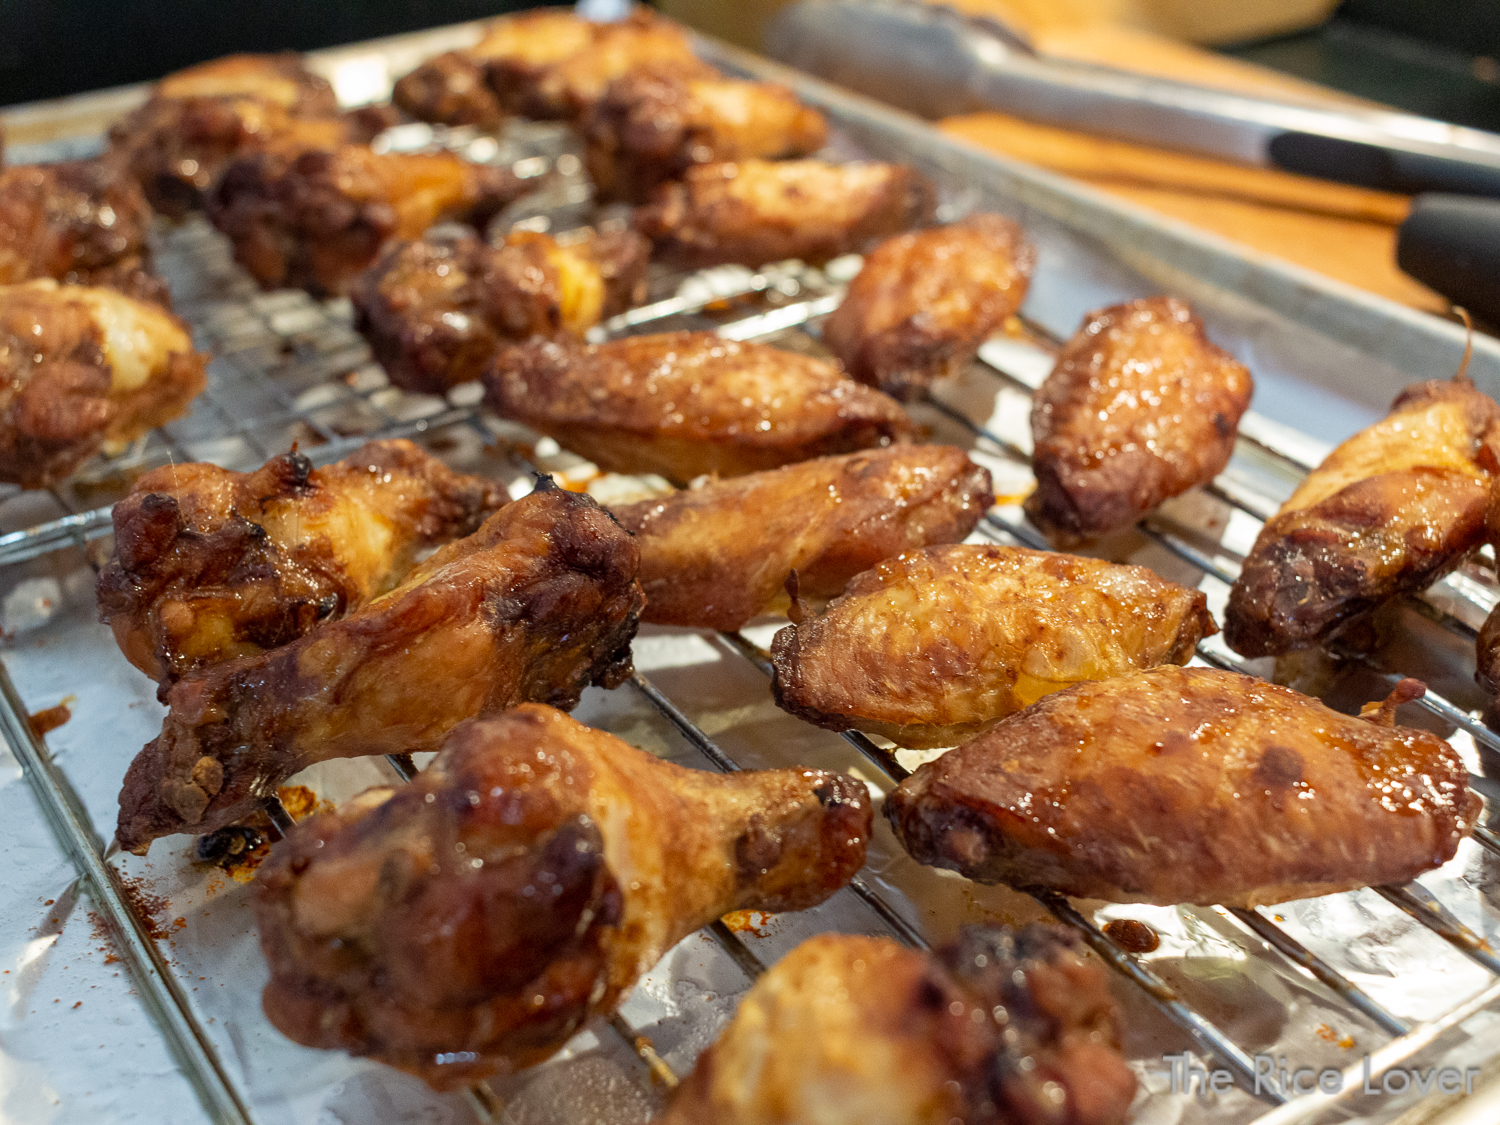 Crispy, freshly baked marinated chicken wings out of the convection oven